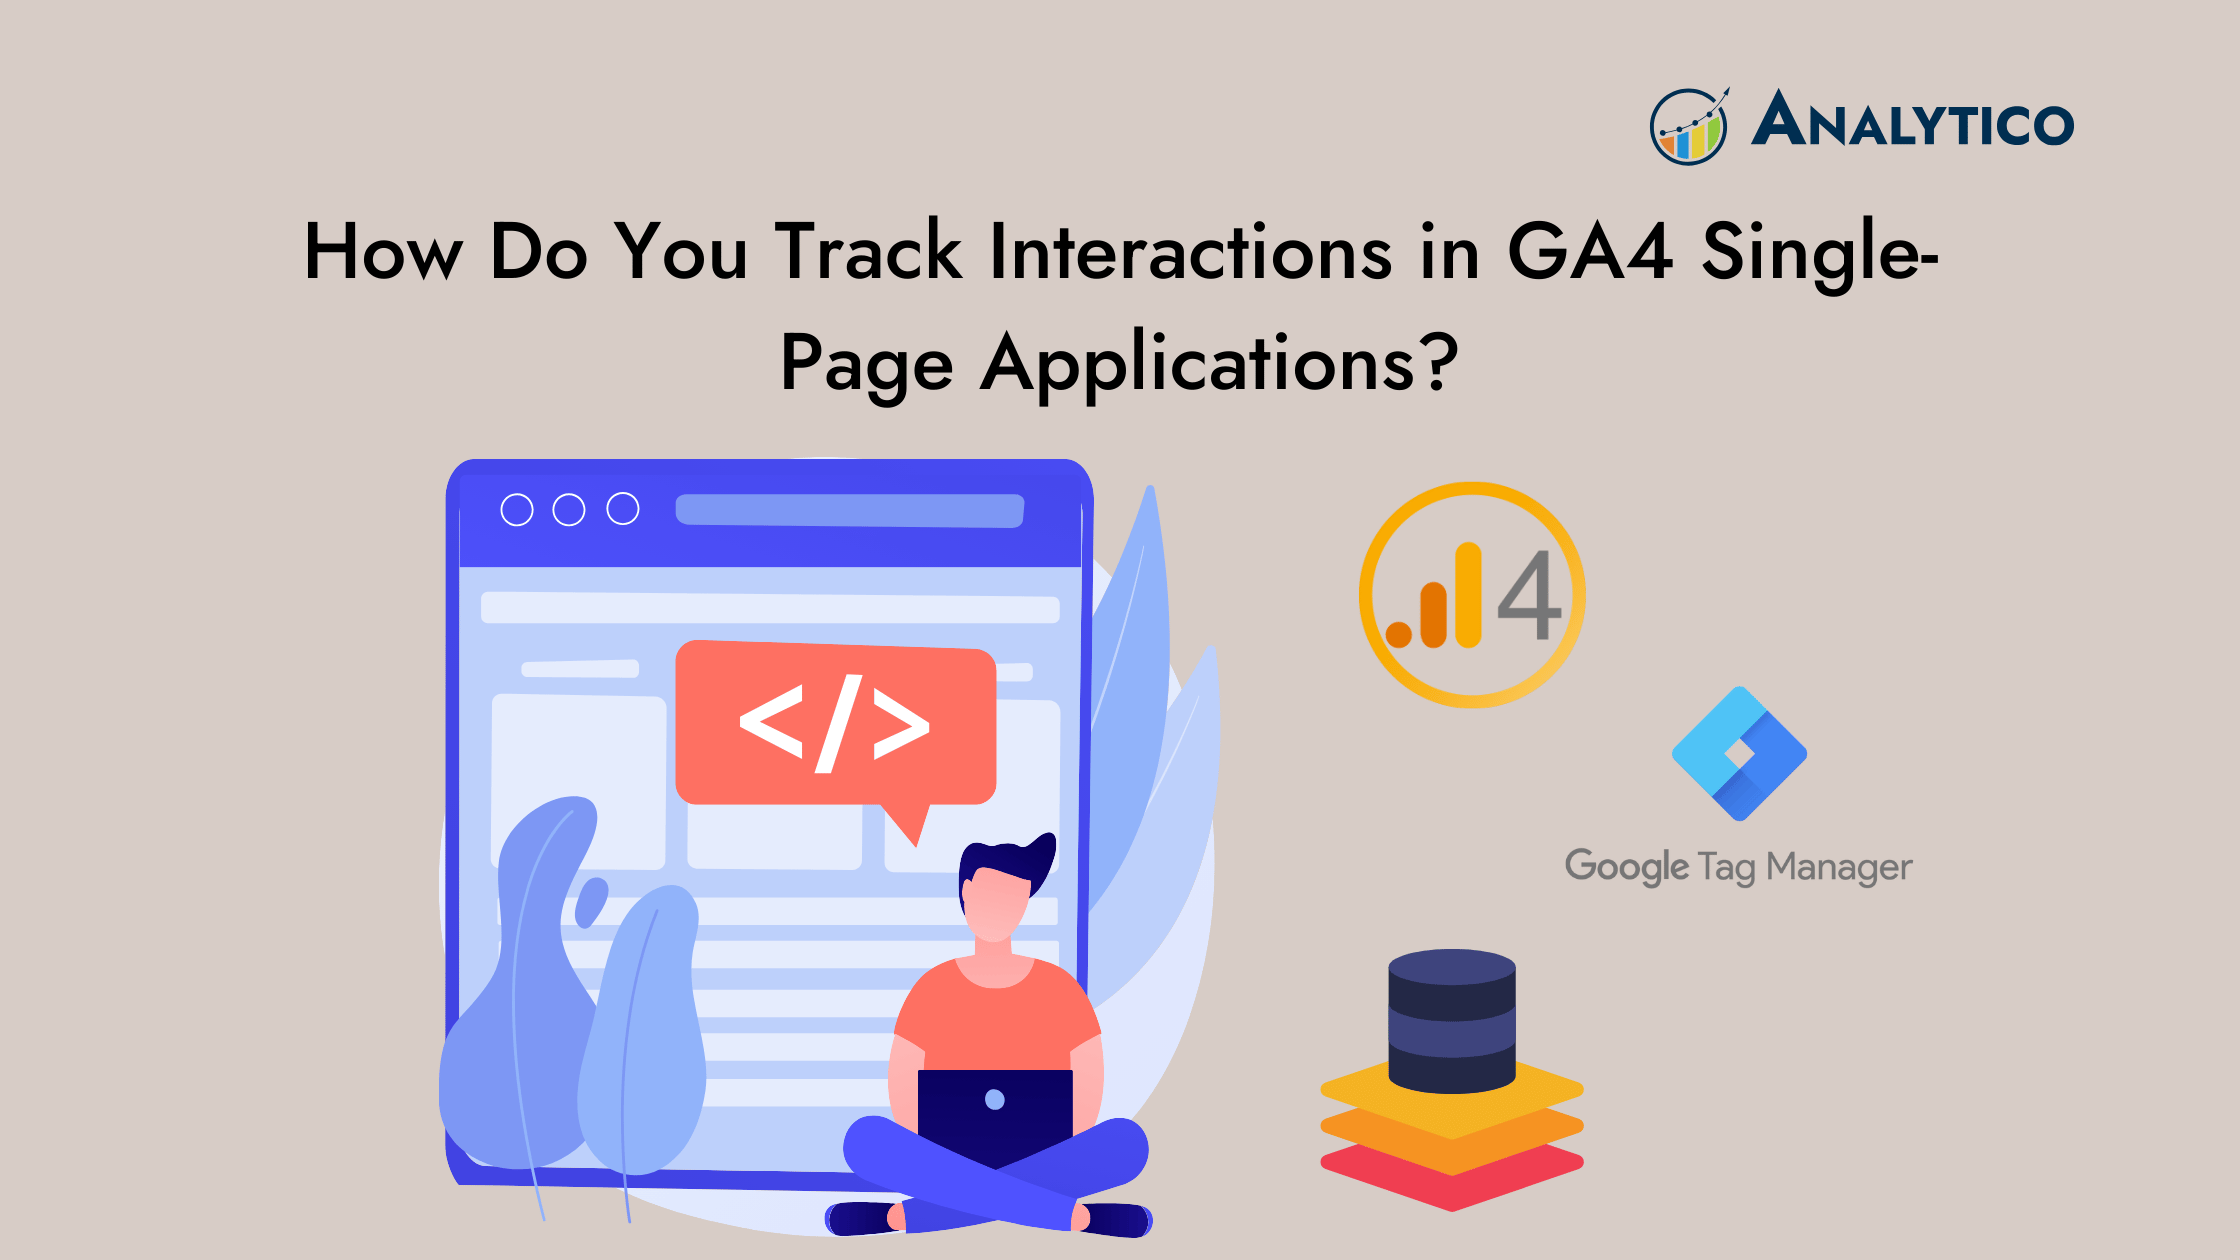 How Do You Track Interactions in GA4 Single-Page Applications?